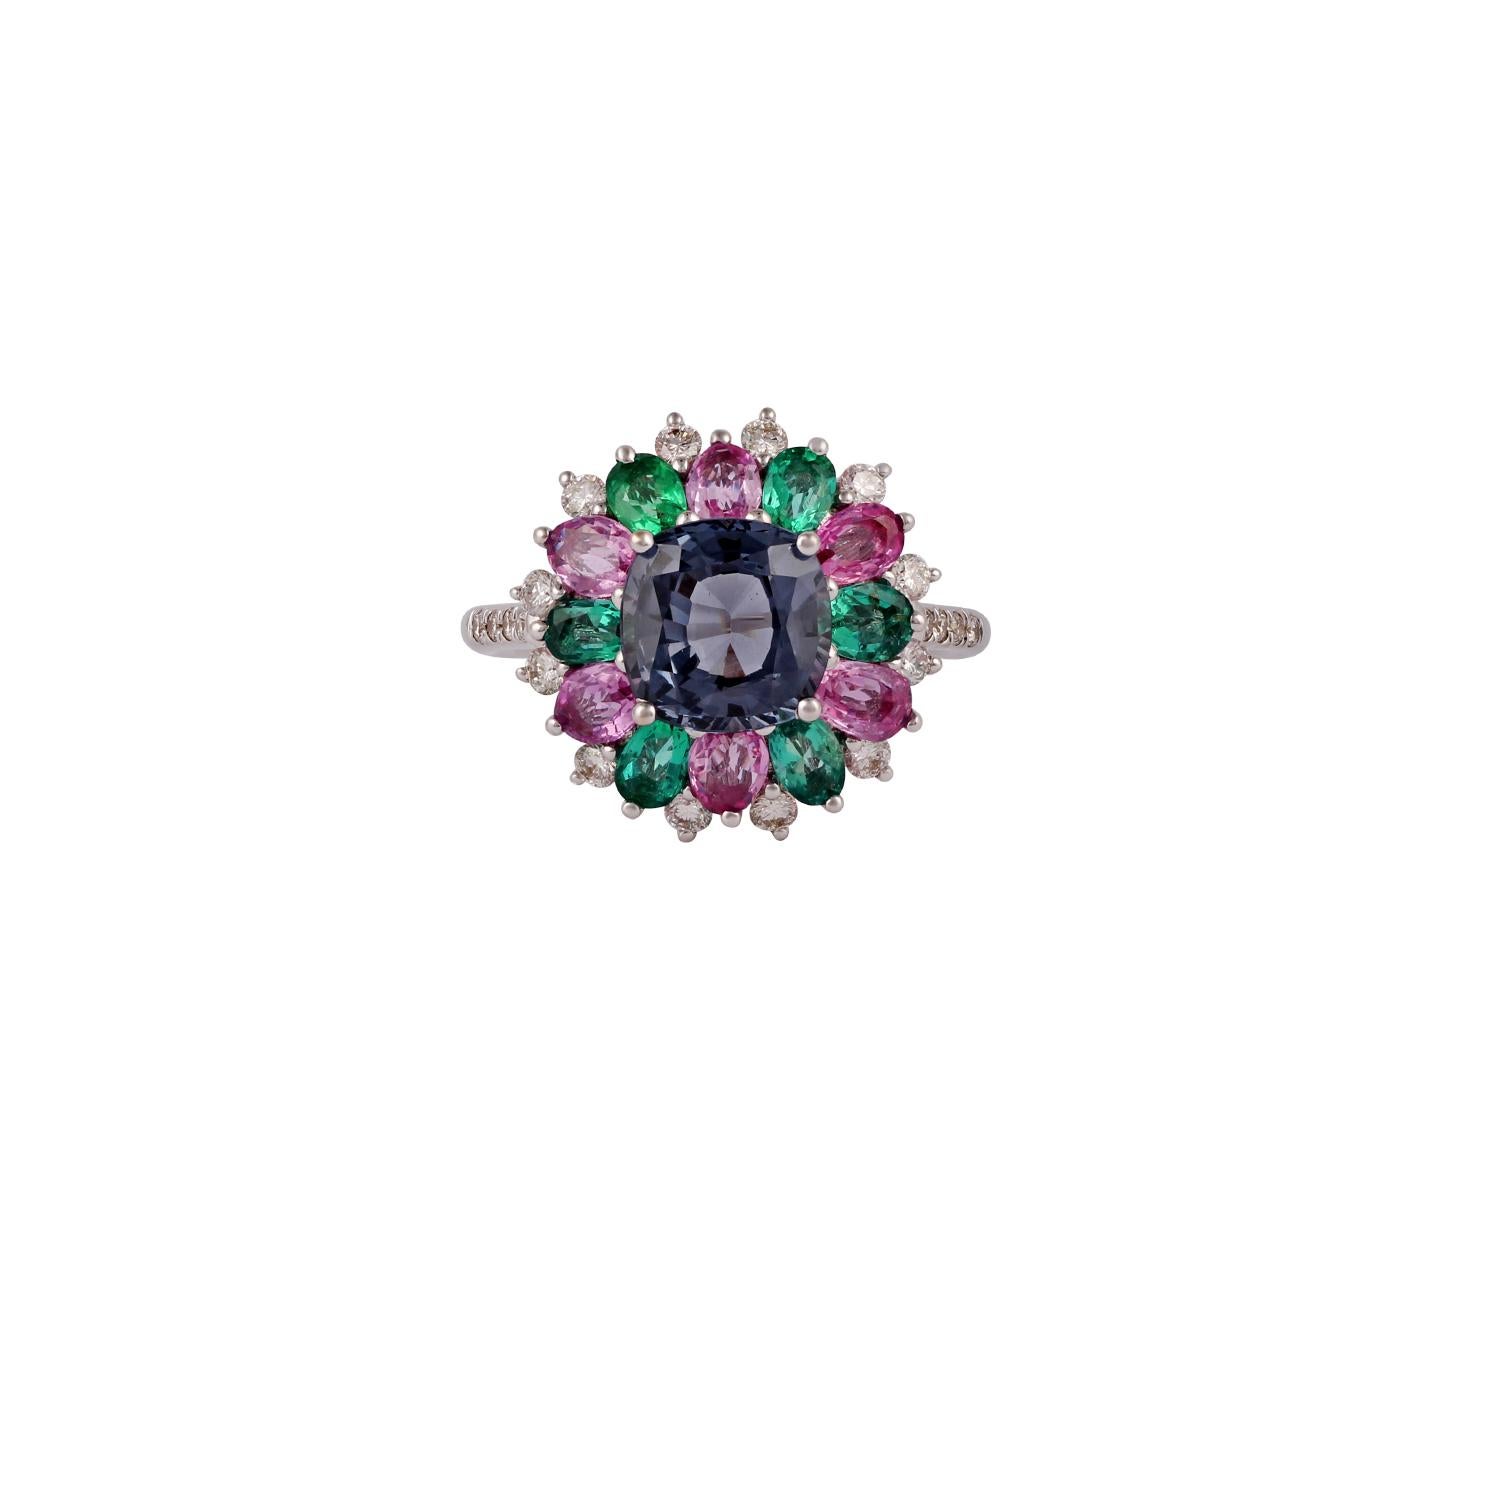 This is an elegant emerald, Multi Sapphire, Spinel & diamond ring studded in 18k gold with 6 piece of  emerald weight 0.81 Carat, 6 piece of Multi Sapphire 1.11 carat,  1 piece of Spinel 2.37 Carat. which is surrounded of mix shaped diamonds weight